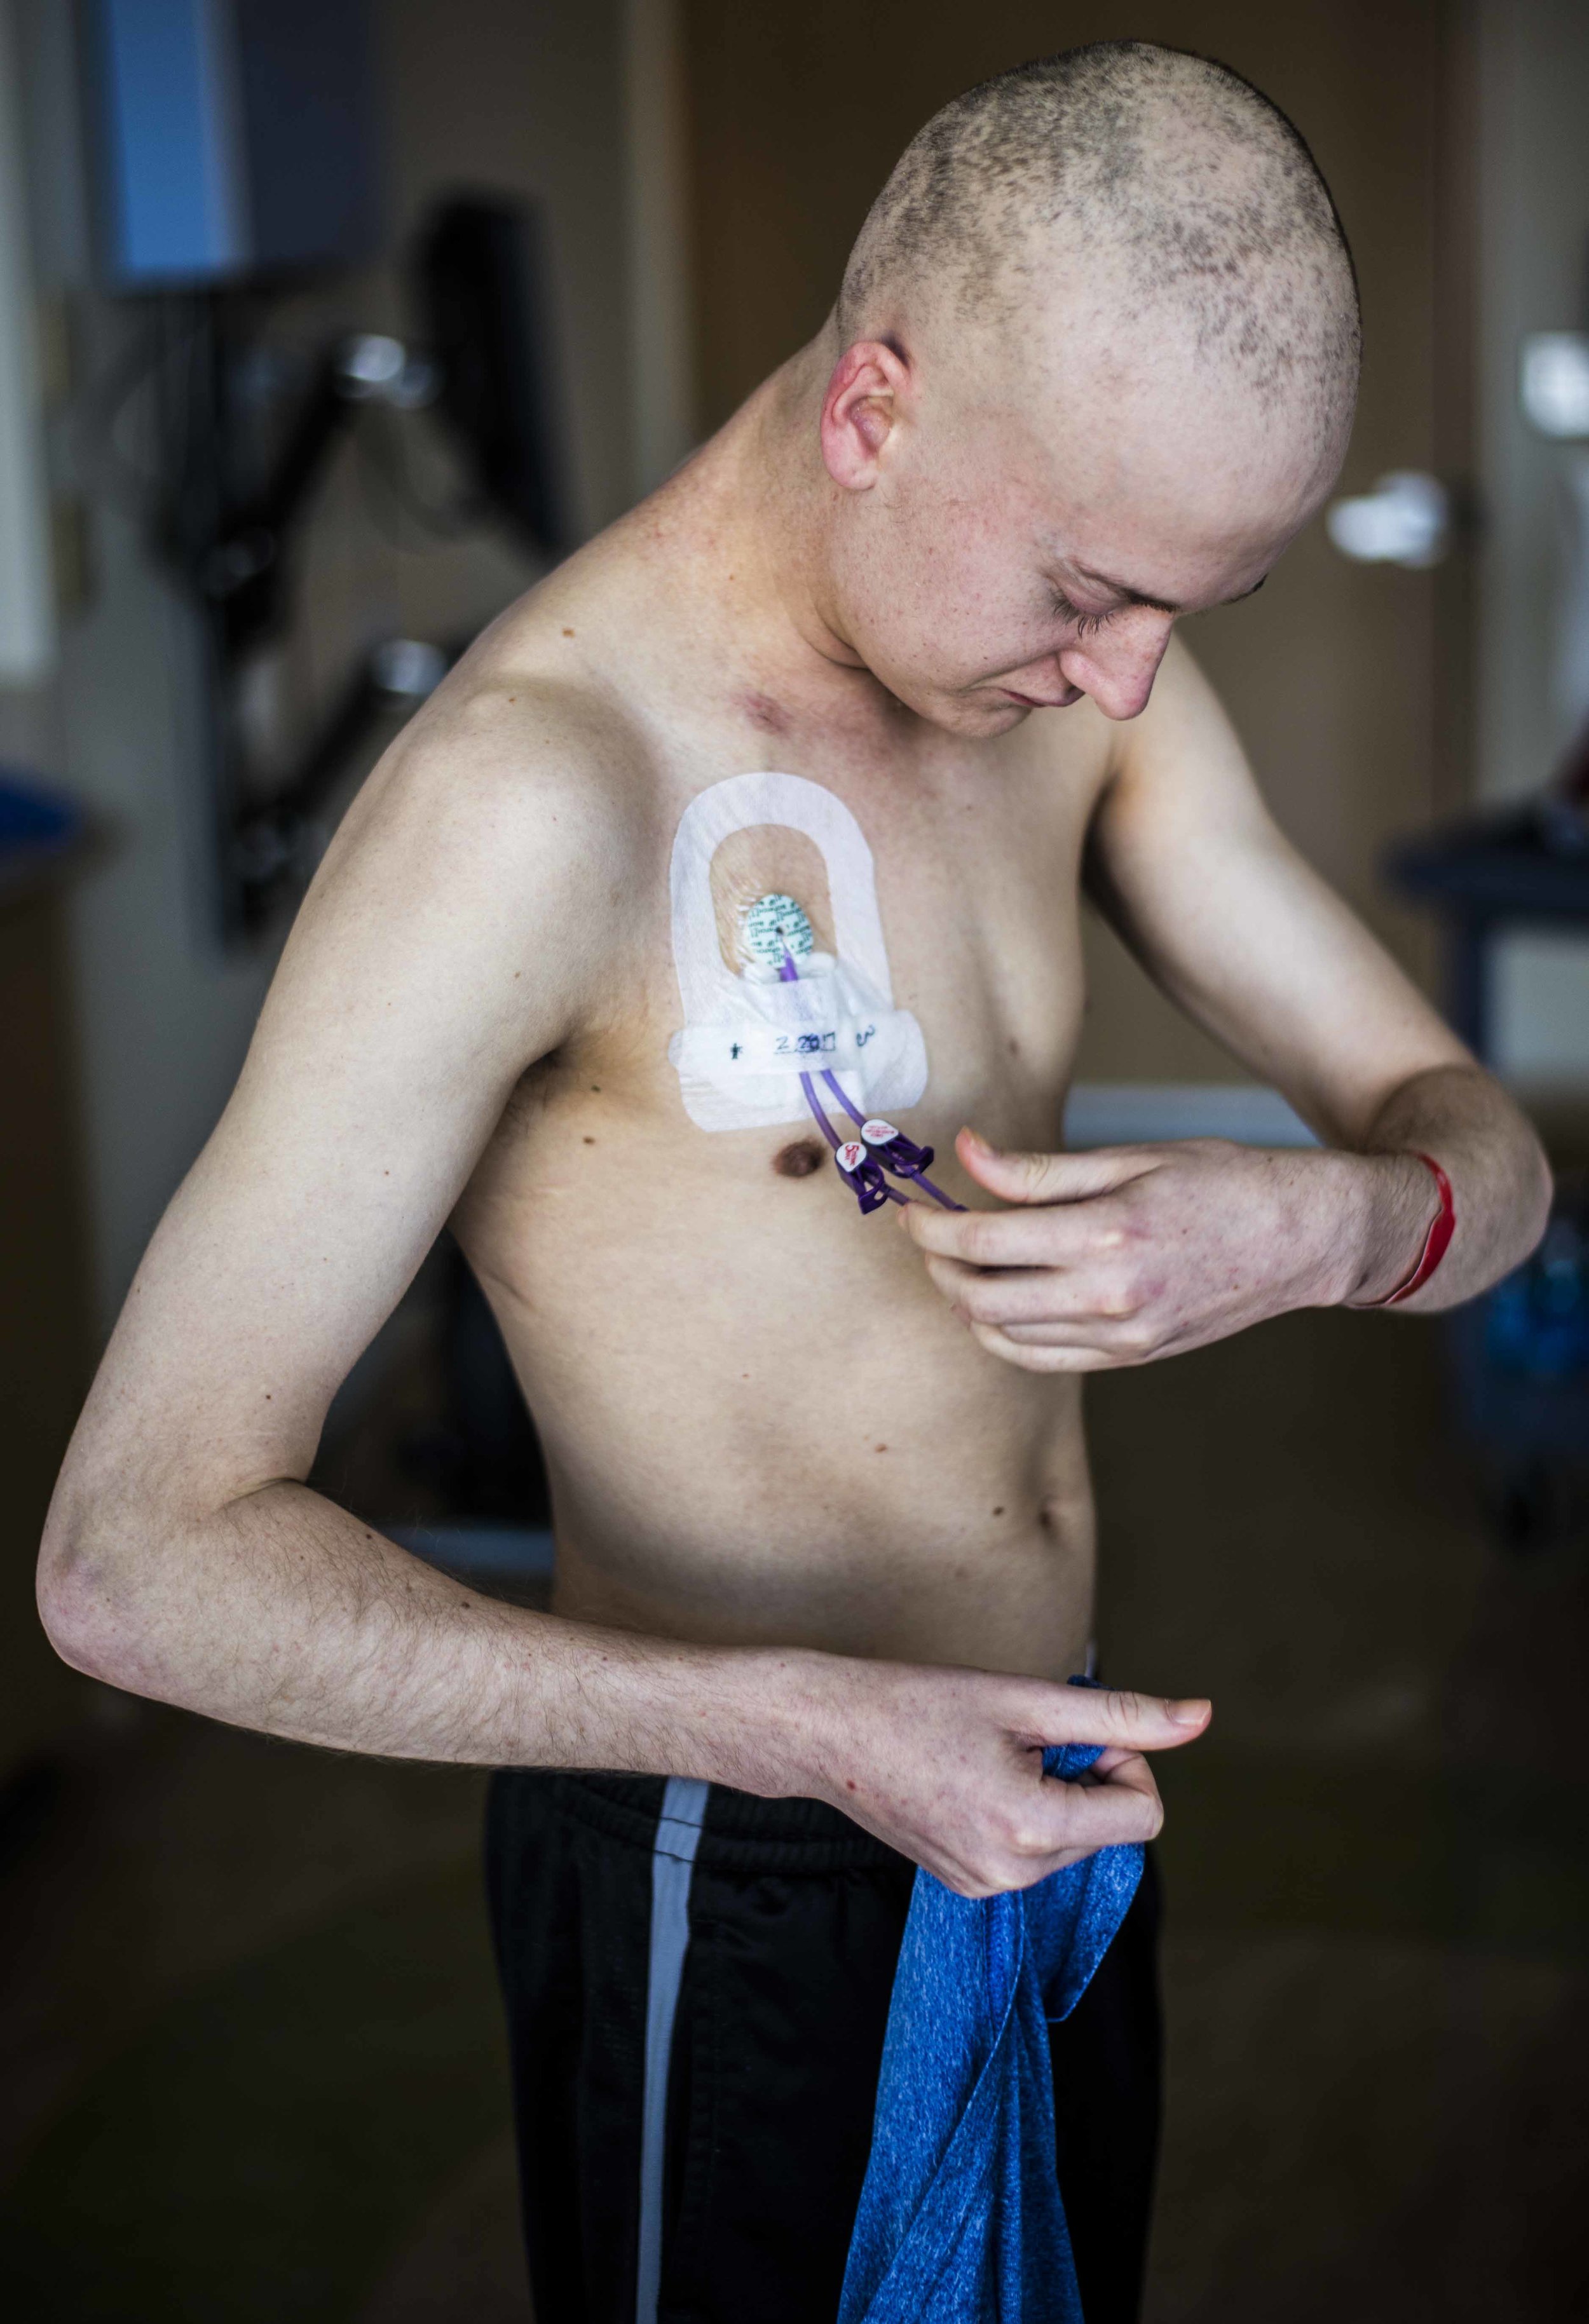  Tanner walks around the room after being attached to an IV pole for approximately 33 days, March 5. He took off his shirt to inspect his central line, the former bridge between him and the IV. 